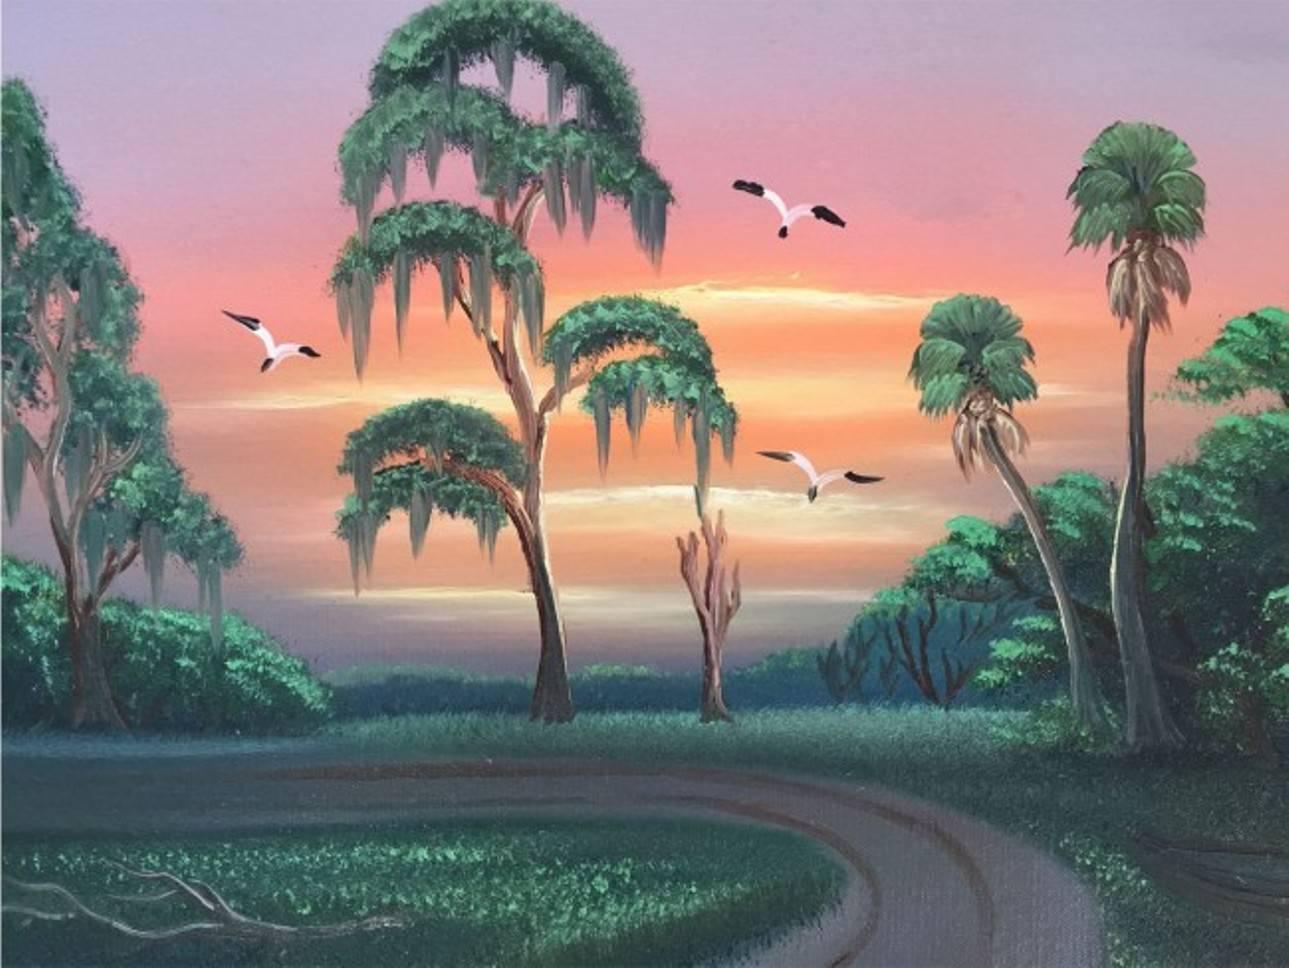 Hall of fame Florida highwaymen artist Al Black original acrylic on canvas board painting. Signed lower right in print, Al Black. Gorgeous Florida landscape expressed in a Classic Florida sunset setting with a vibrant pink and purple sky and emerald